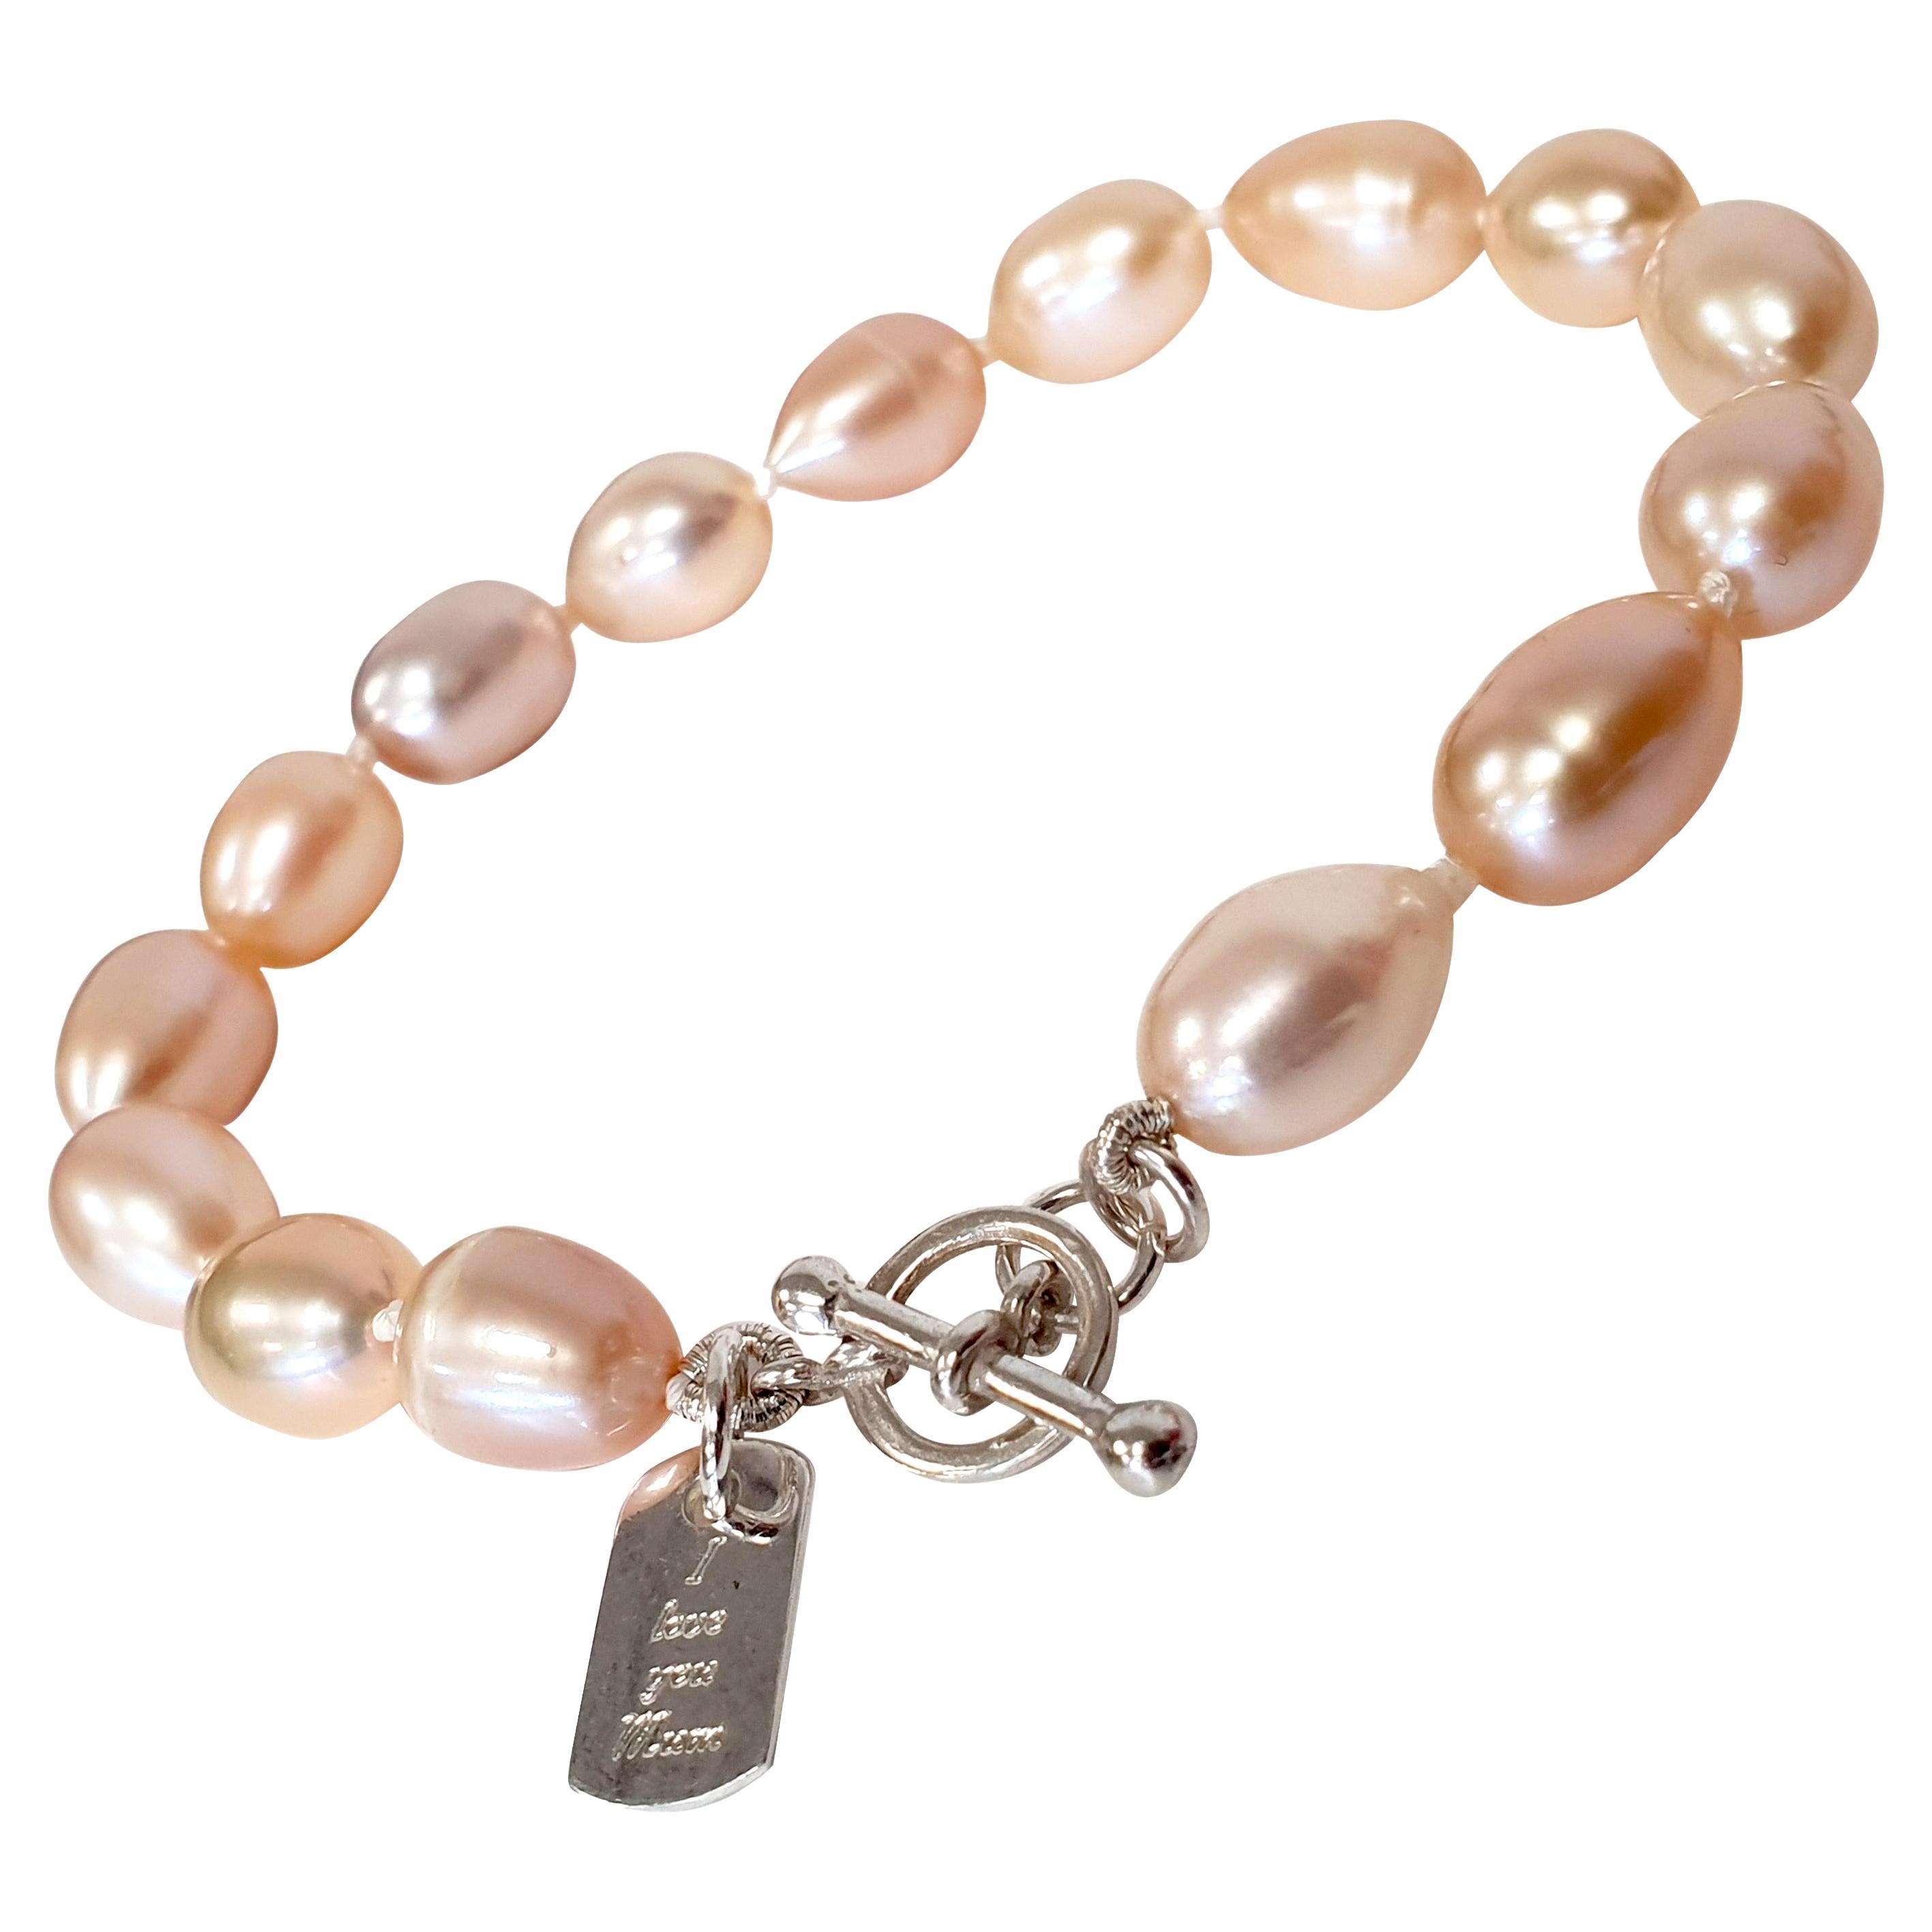 I Love You Mum Sterling Silver Tag Charm Knotted Peach Pearl T-Bar Bracelet